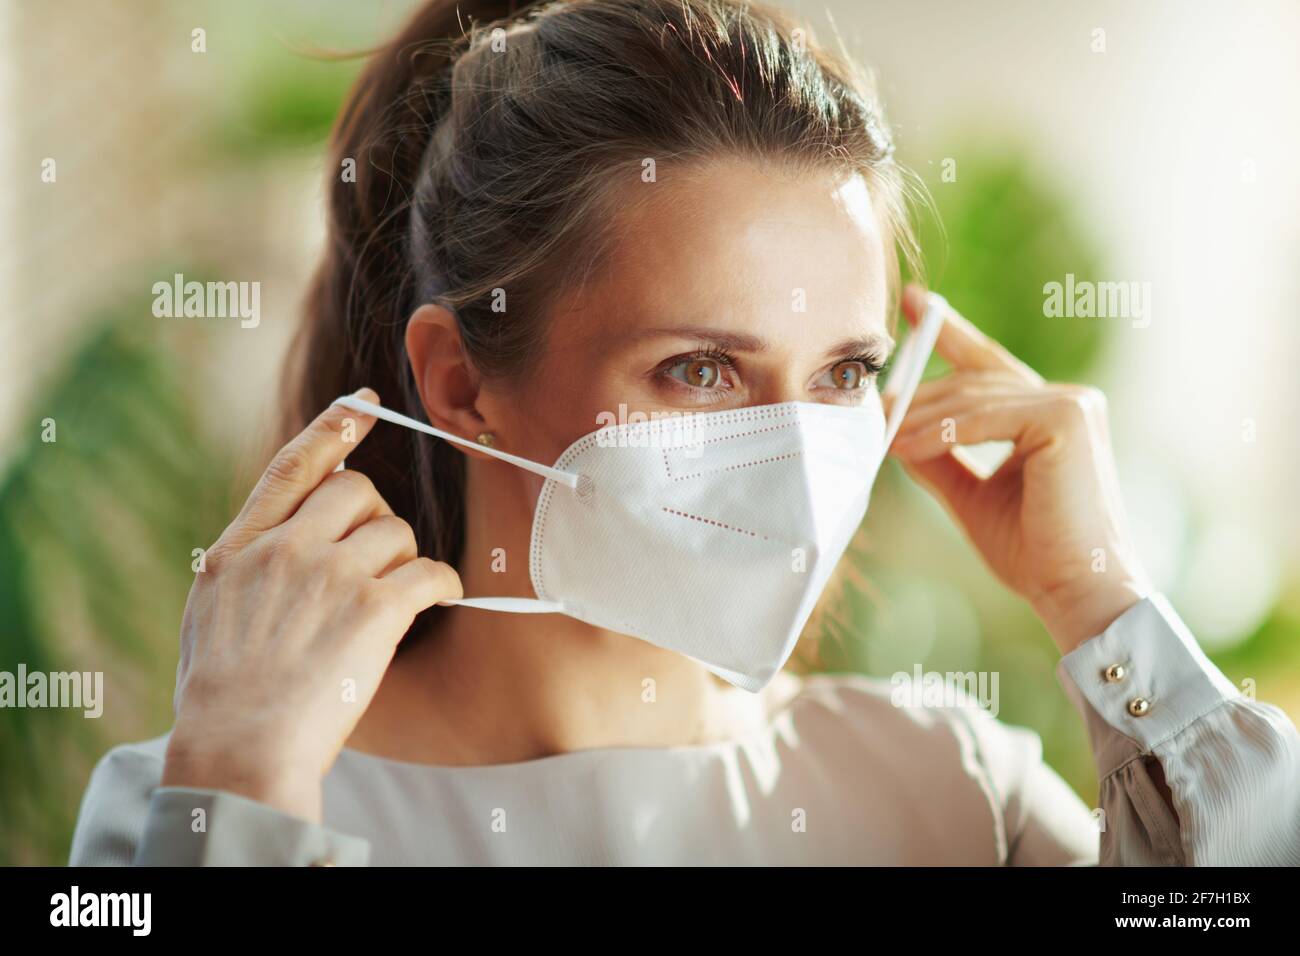 covid-19 pandemic. middle aged woman in grey blouse wearing ffp2 mask. Stock Photo